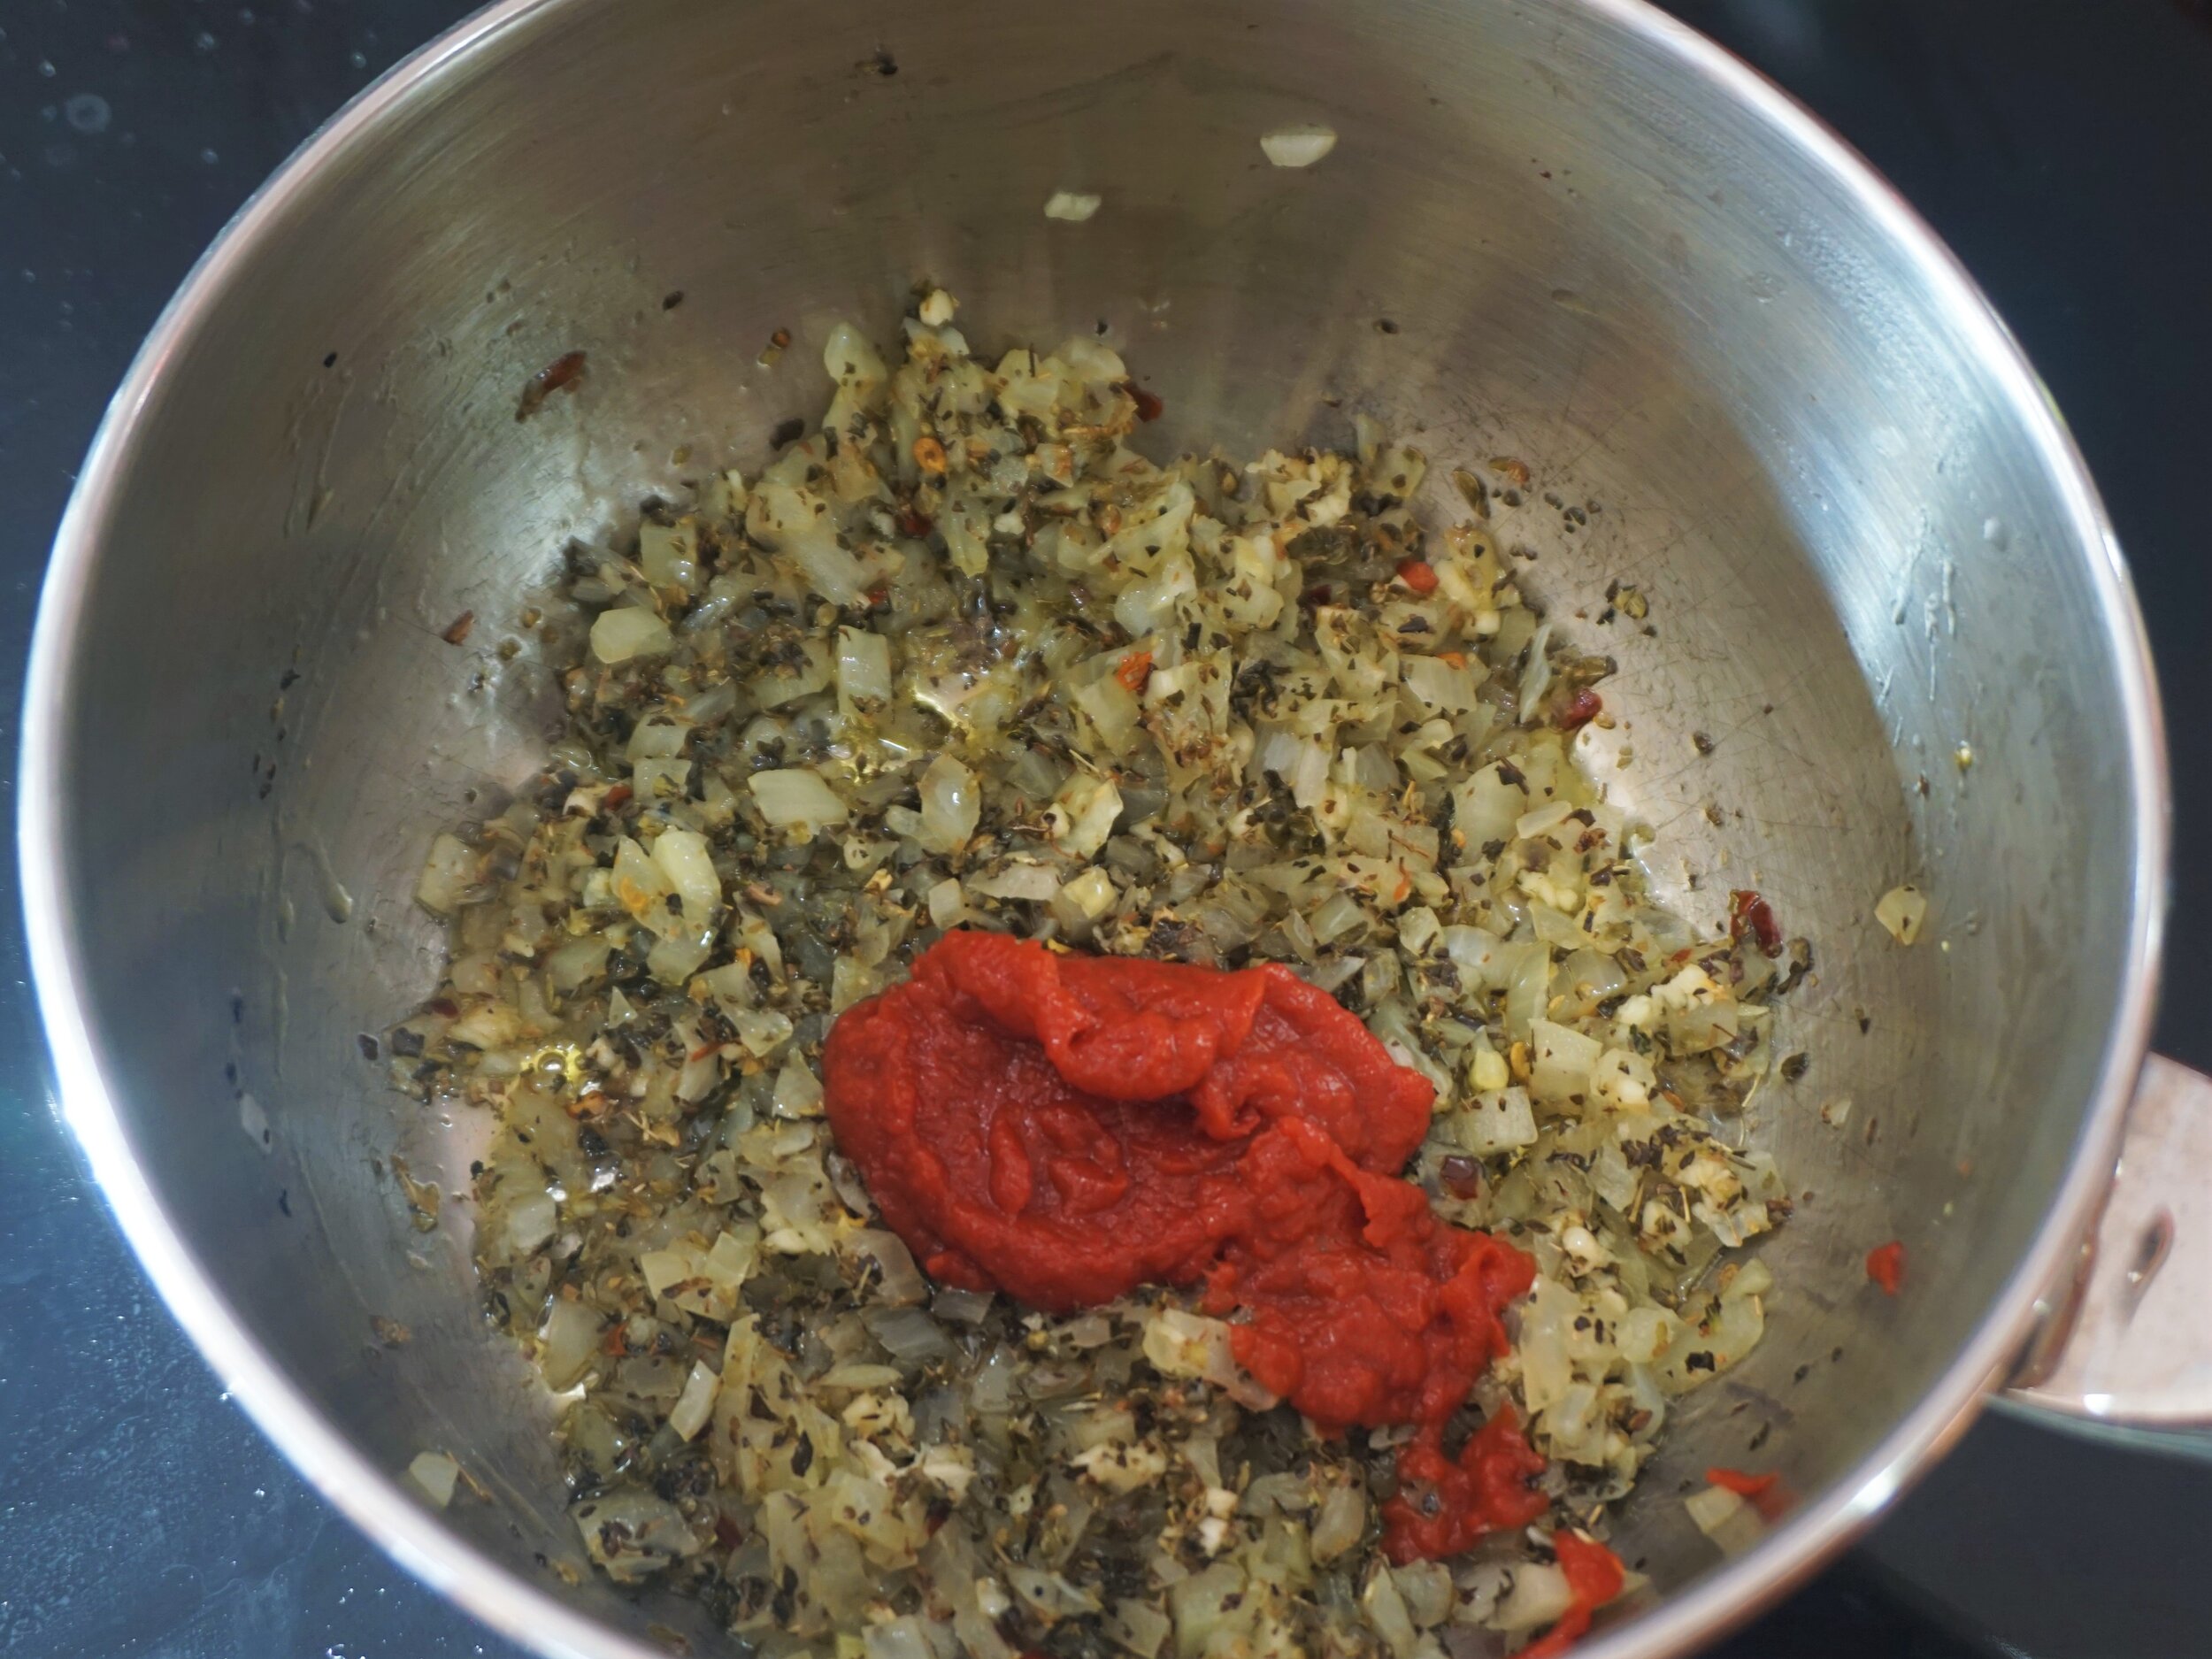 Youalways want to fry your tomato paste before you add the liquid ingredients.